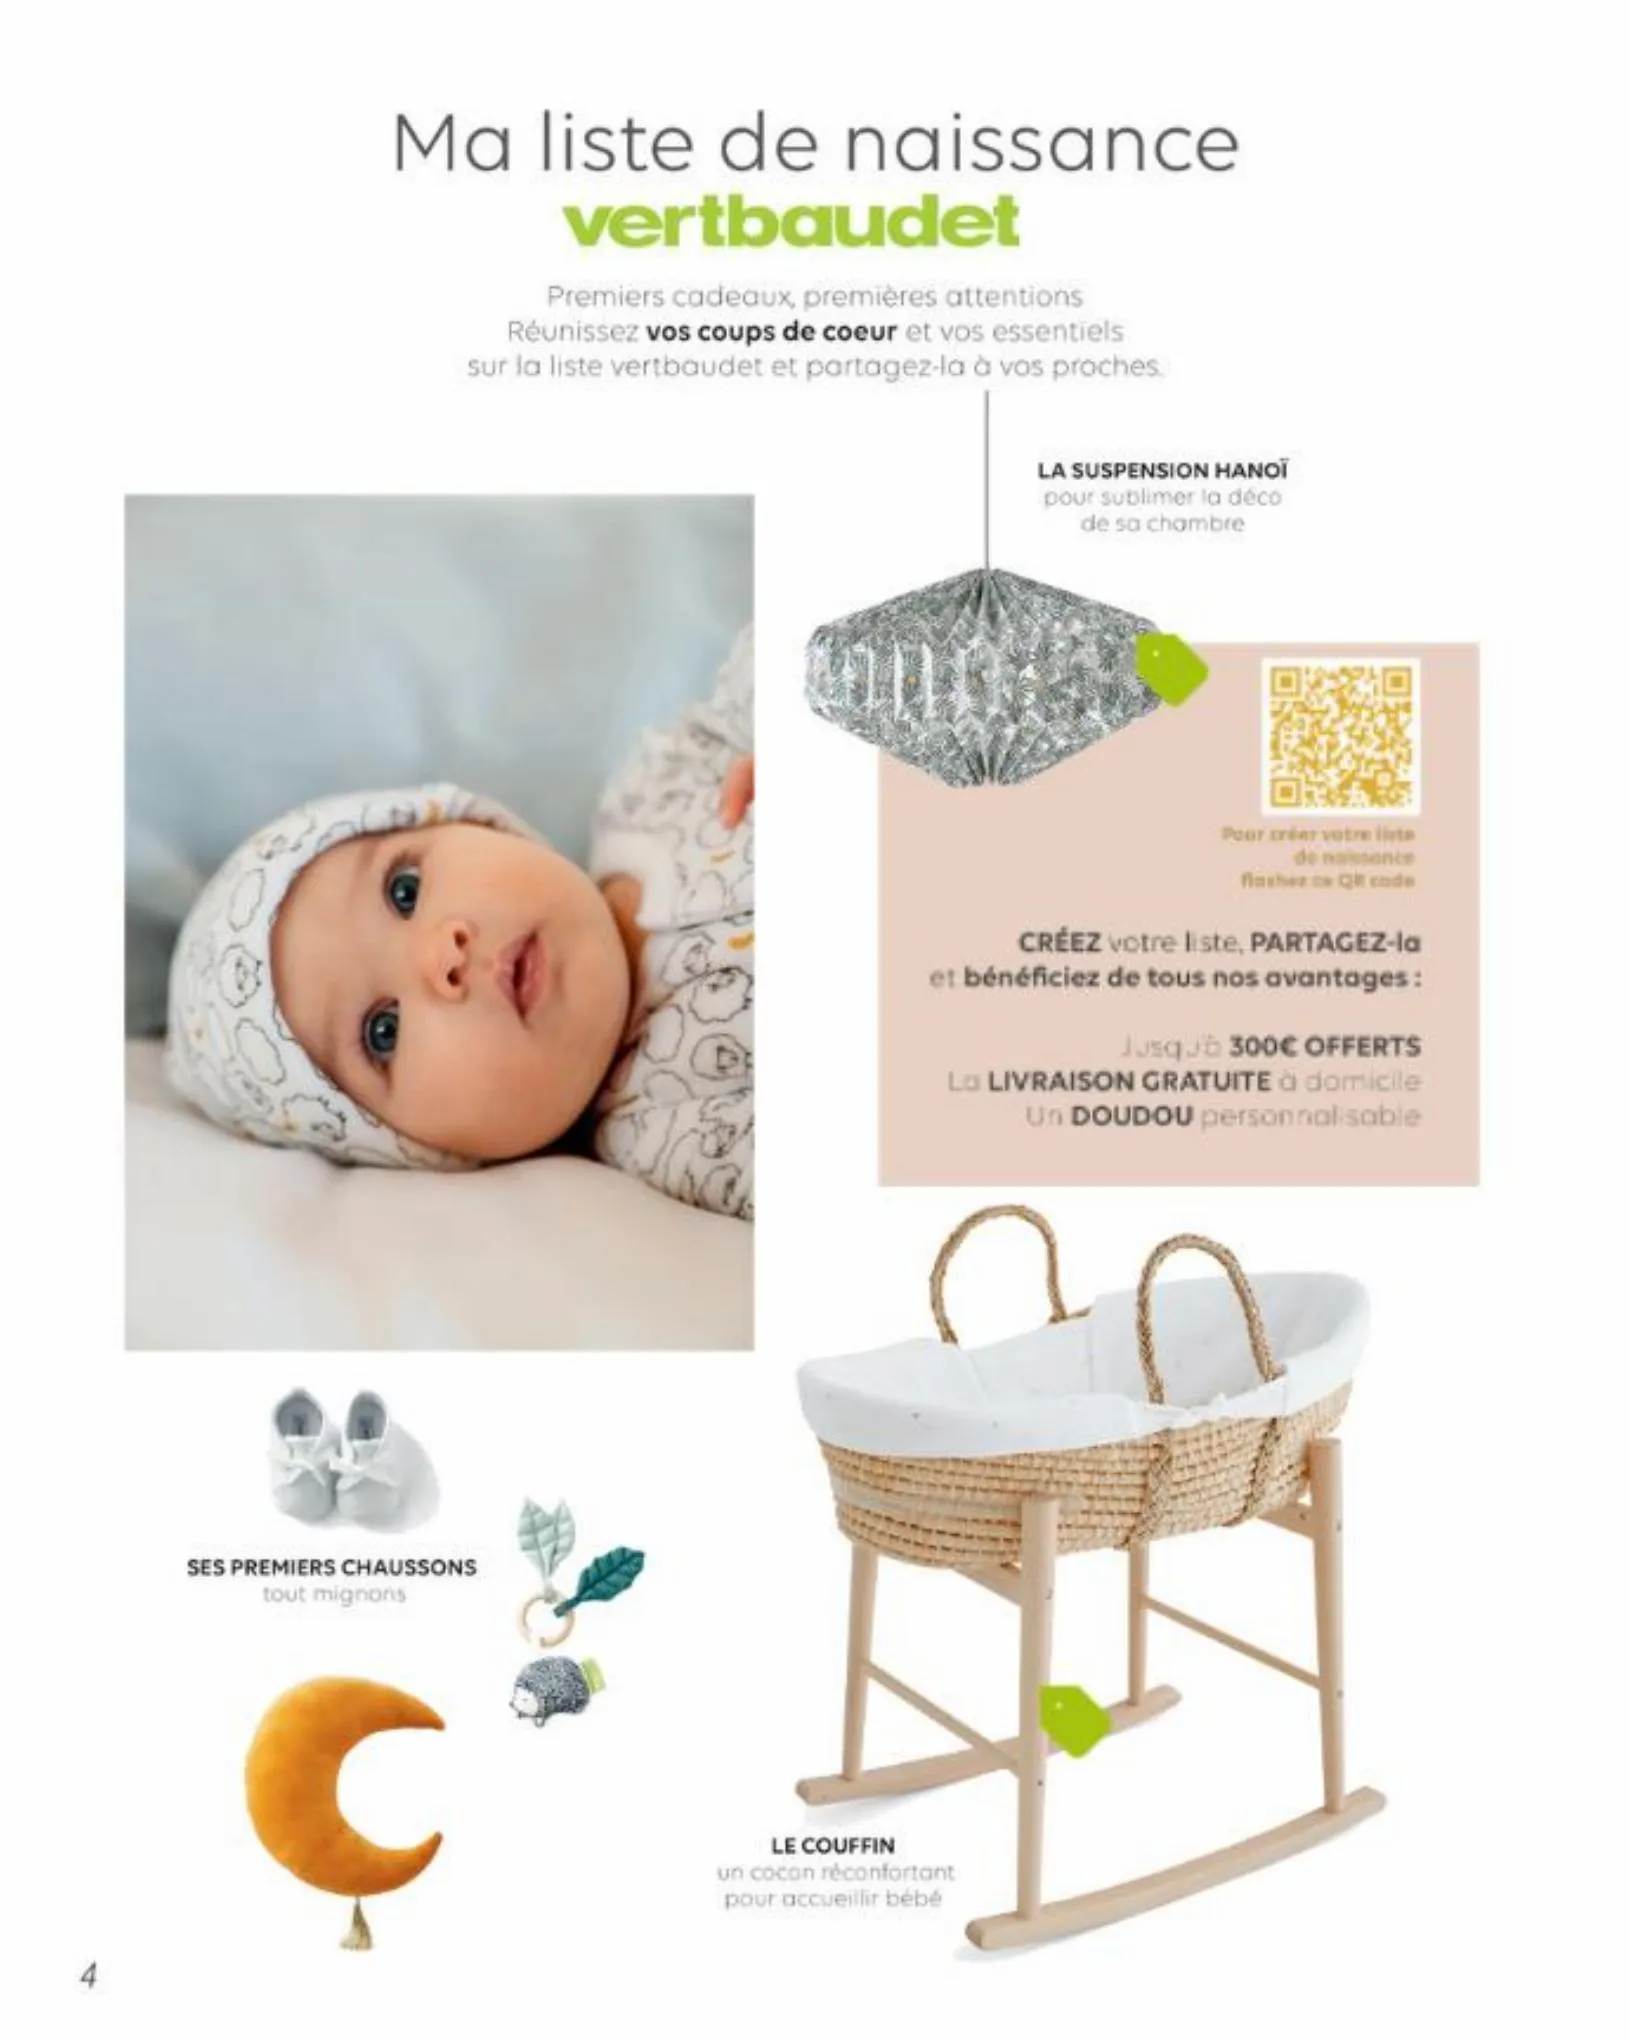 Catalogue Vertbaudet Baby, page 00004